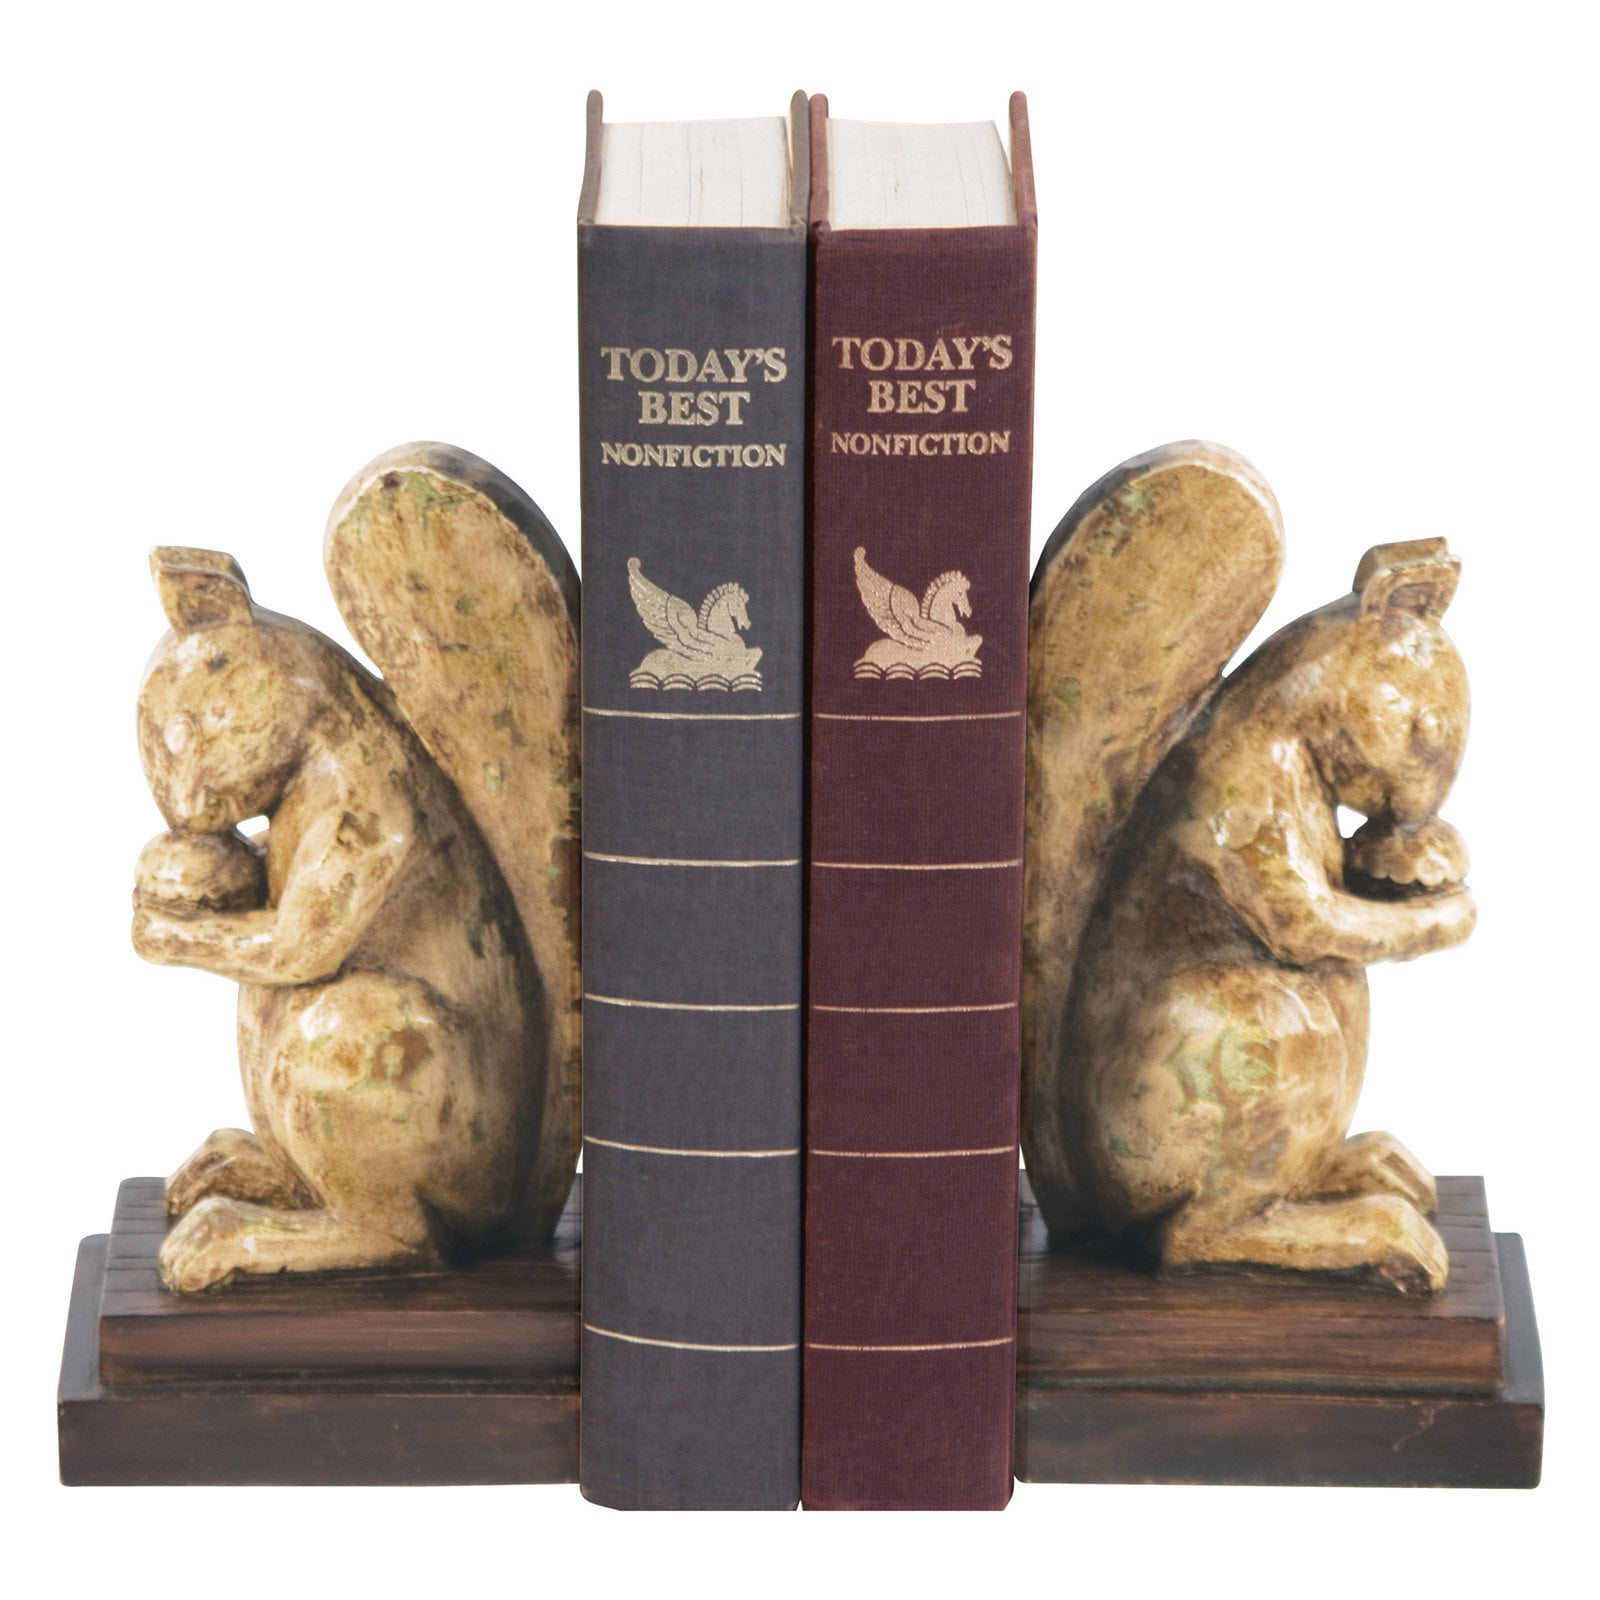 ASDDD Decorative Book Holders Bookends 1 Pair of Retro Elk Art Table Bookends Universal Non-Slip Resin Bookends for Bookshelf Decoration Bookends Book Ends